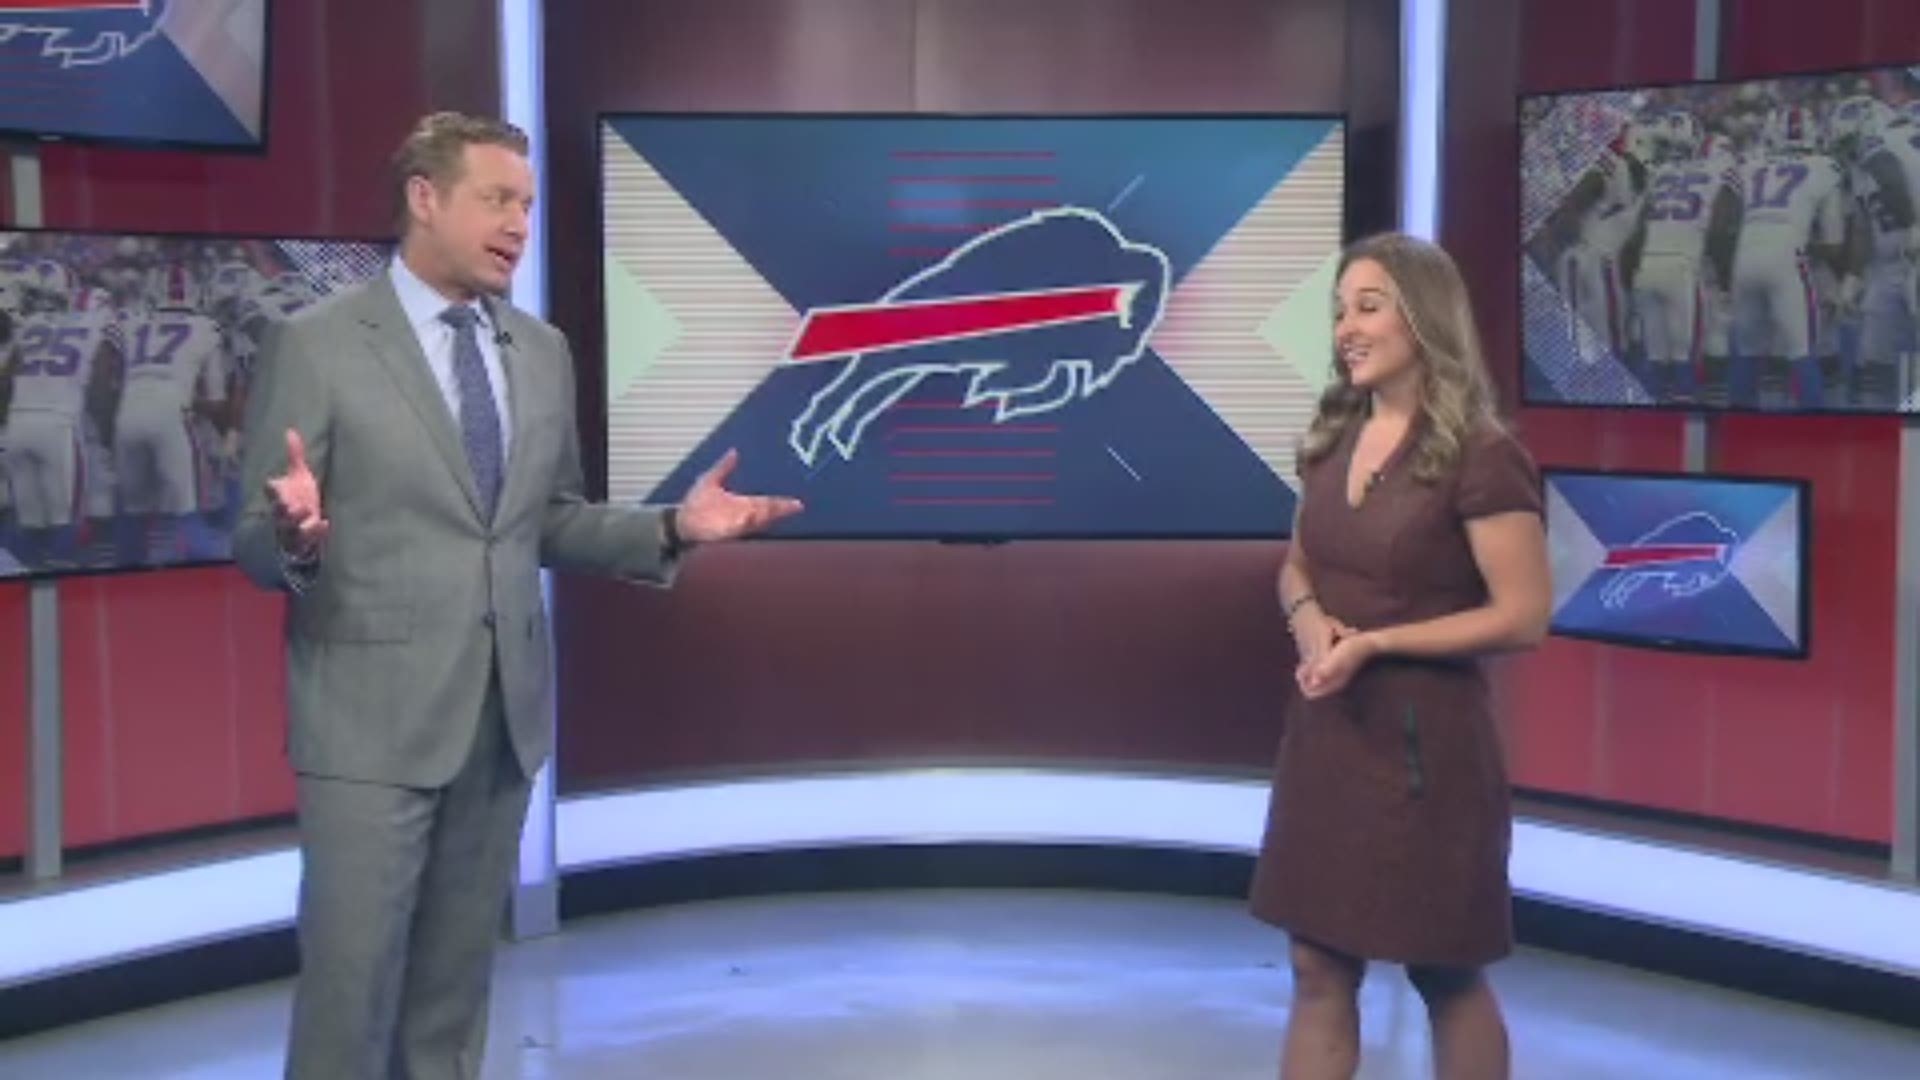 2 on Your Side's Adam Benigni and Heather Prusak discuss who needs to step up and take the next step in order for the Bills to have a successful season.